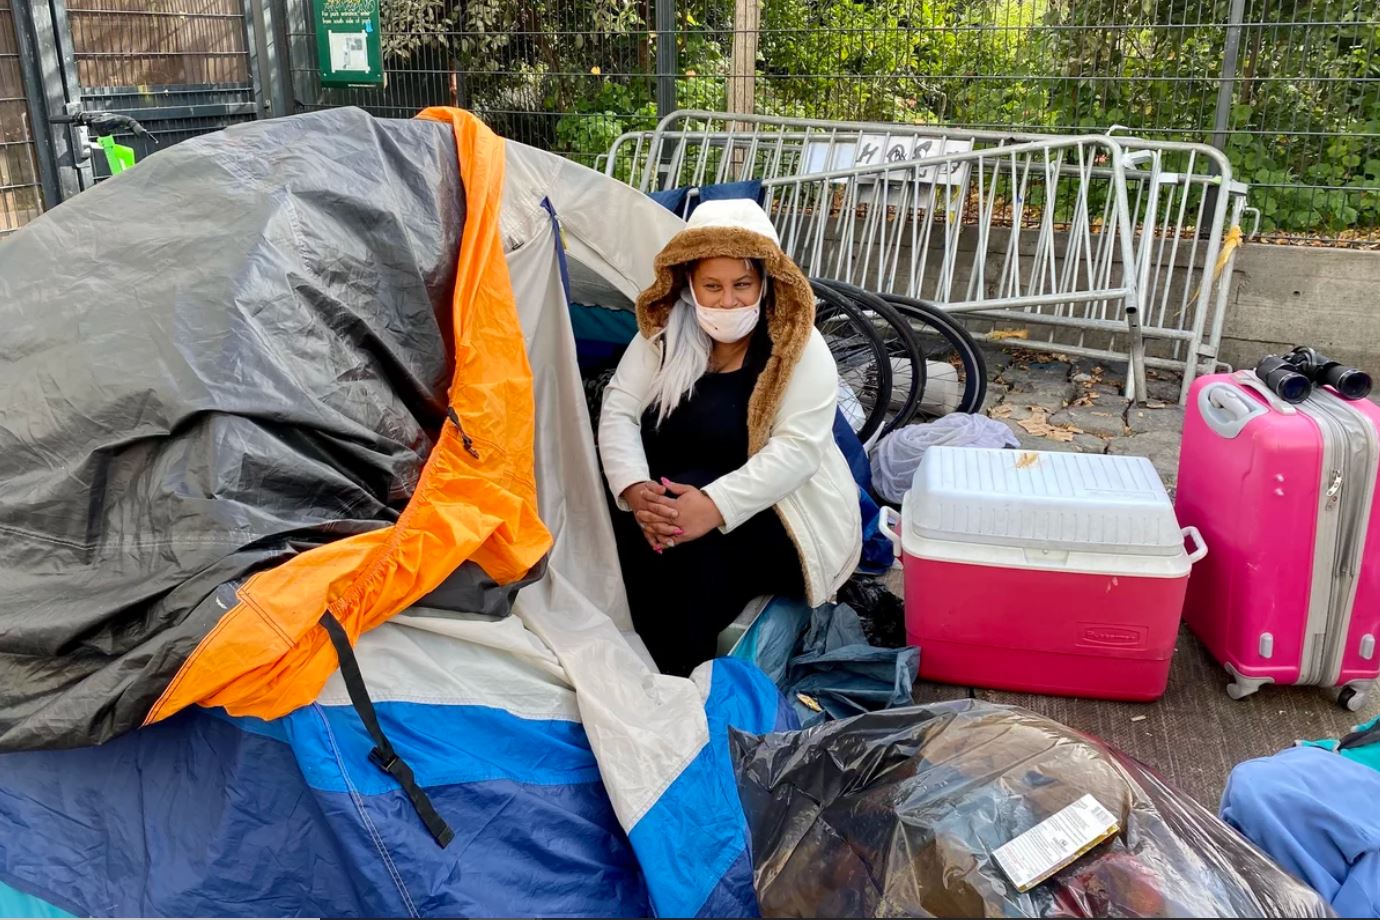 A person wearing a winter jacket and a face mask sits on the door of a camping tent that is set up on a sidewalk in San Francisco.